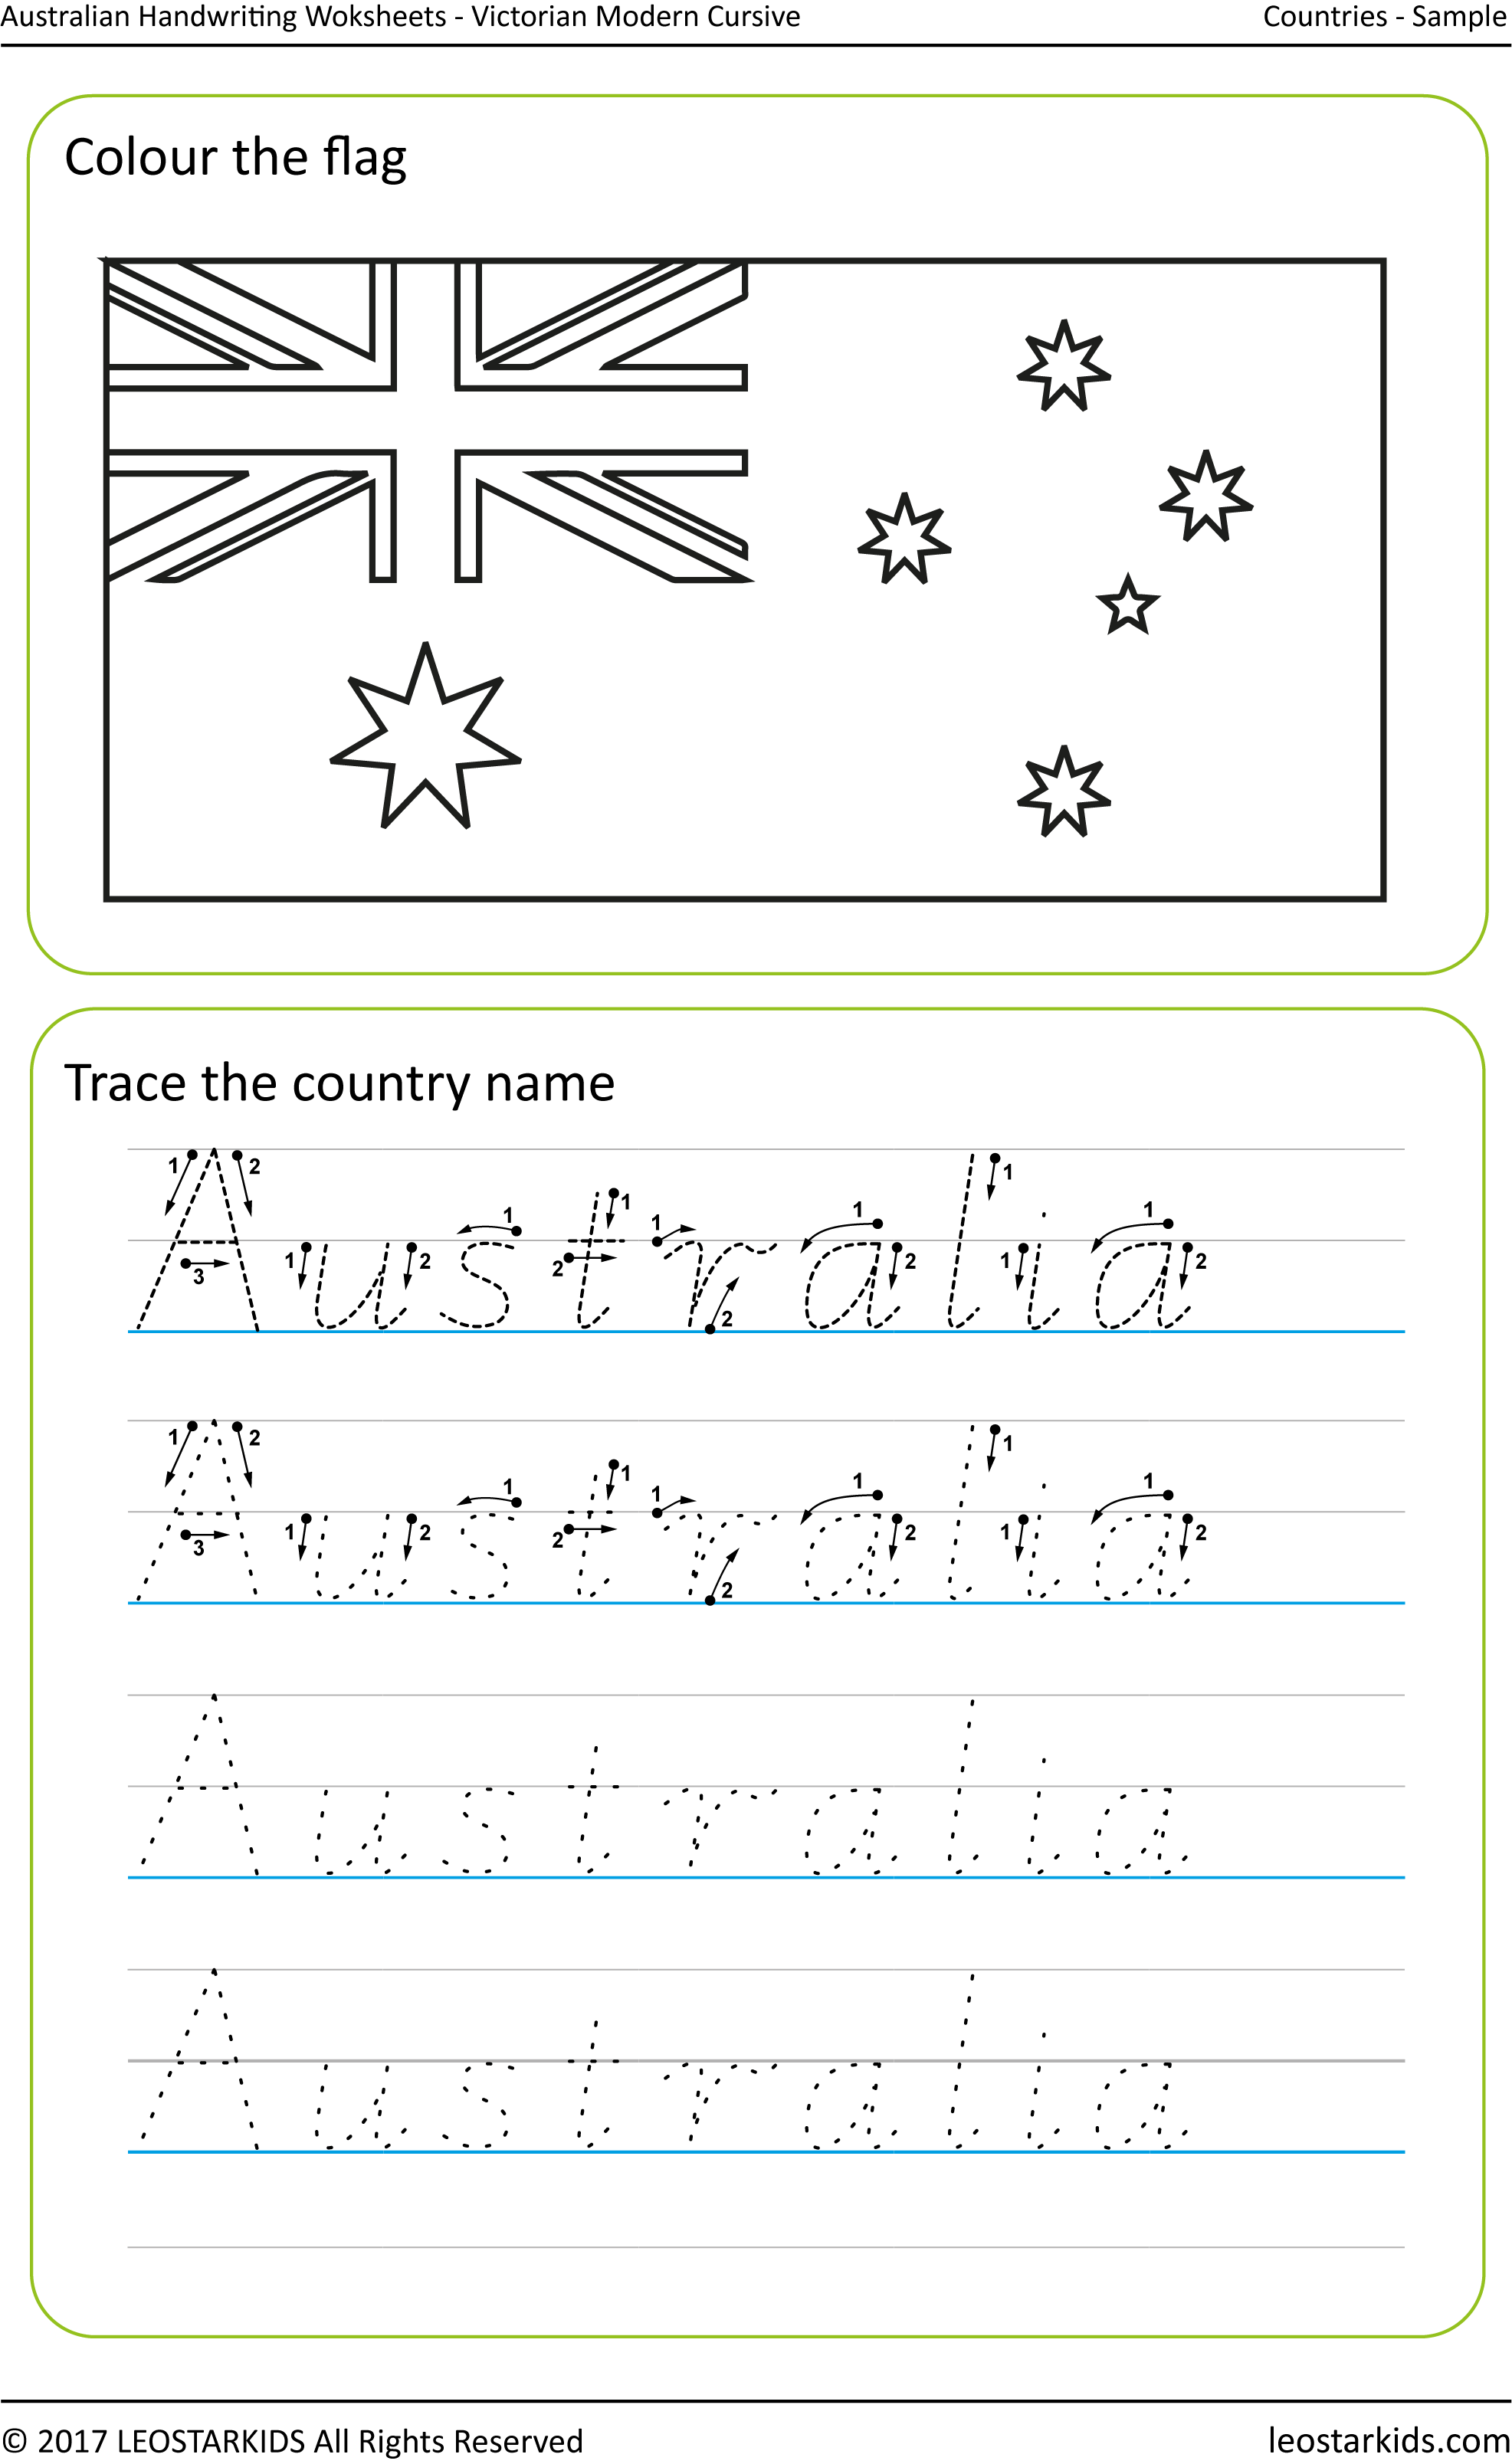 Australian Handwriting Worksheets – Victorian Modern Cursive intended for Name Tracing Victorian Cursive